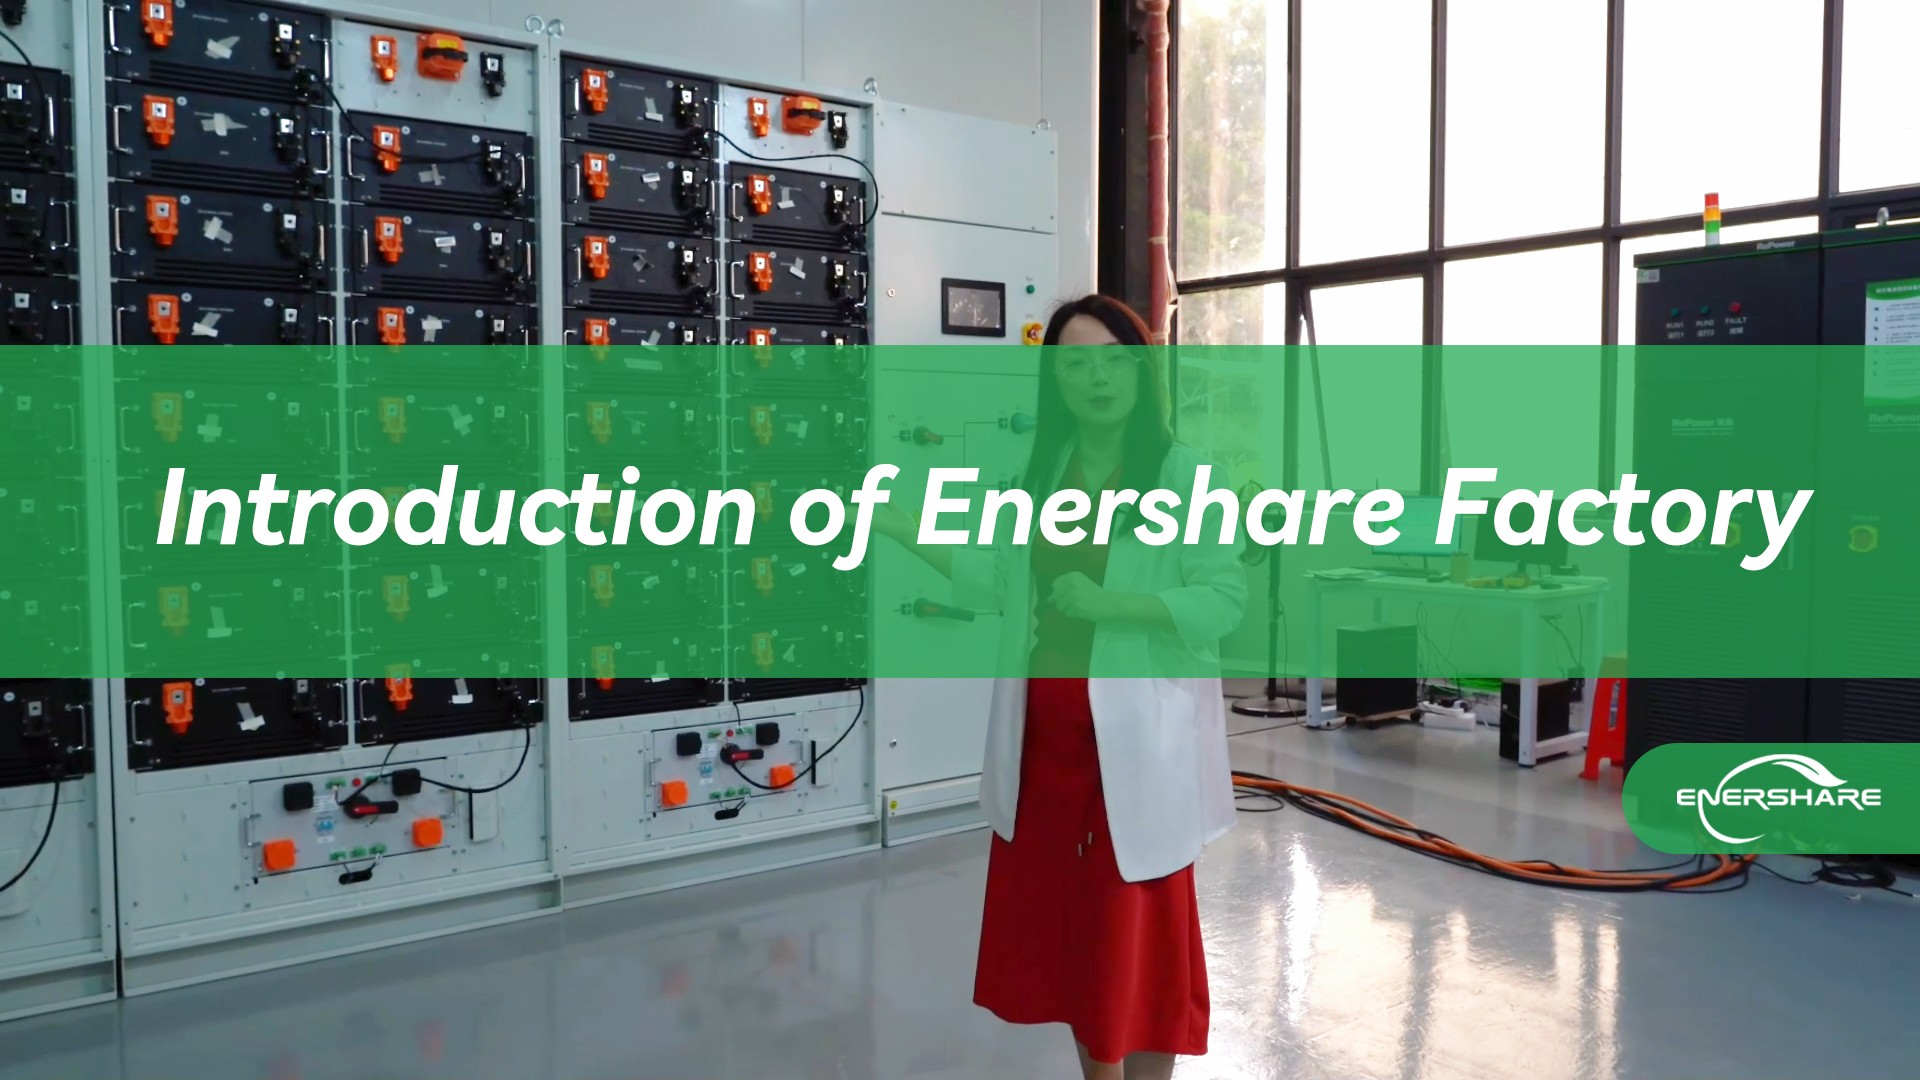 Enershare Factory introduction